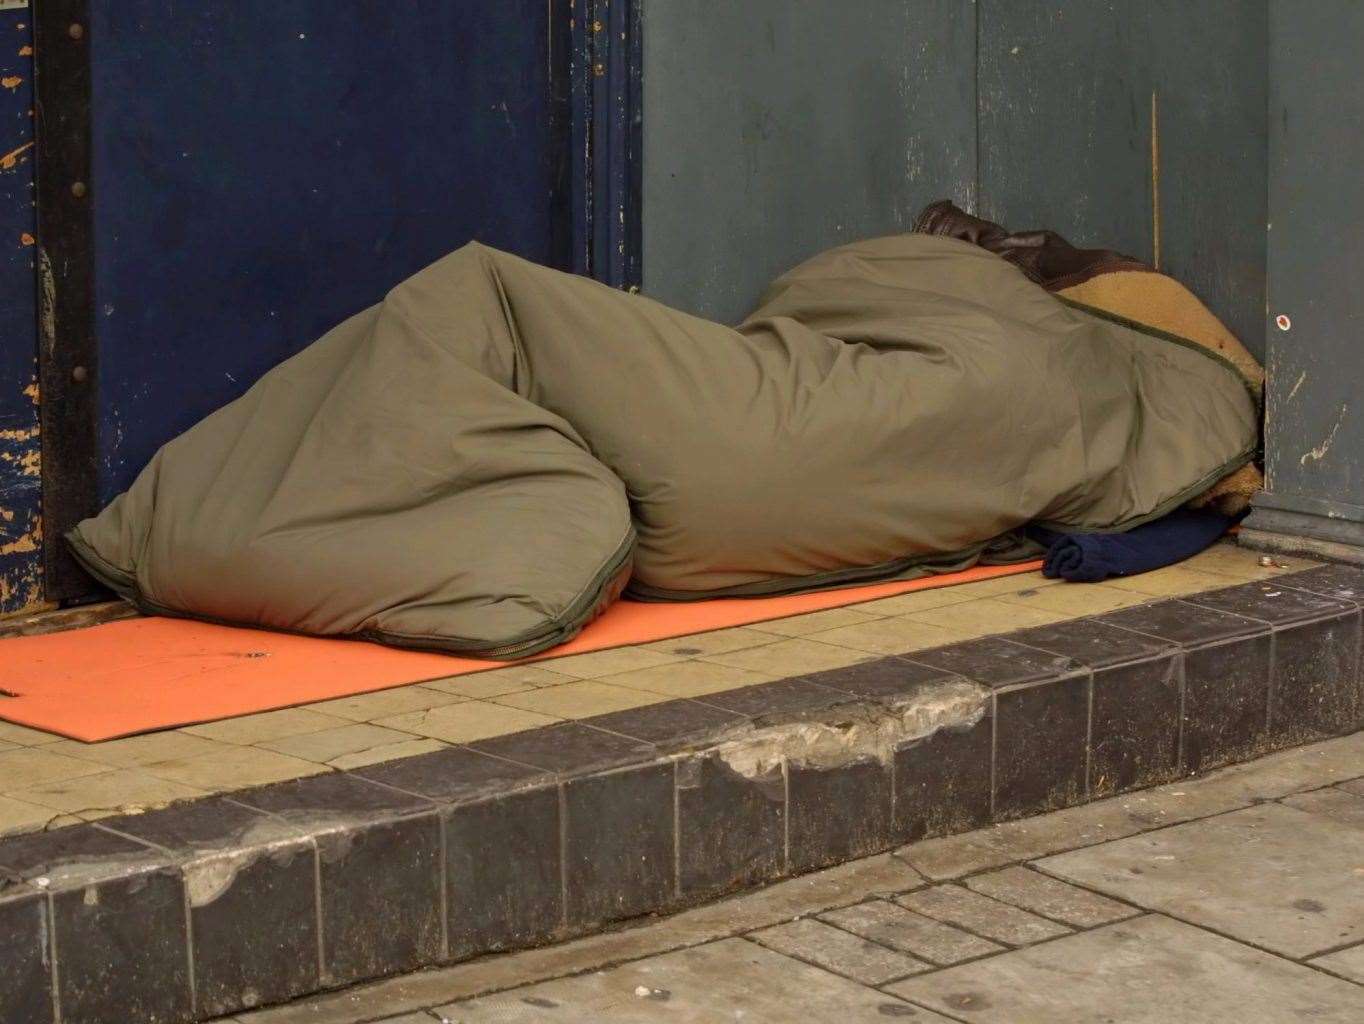 People sleeping rough often have to resort to begging